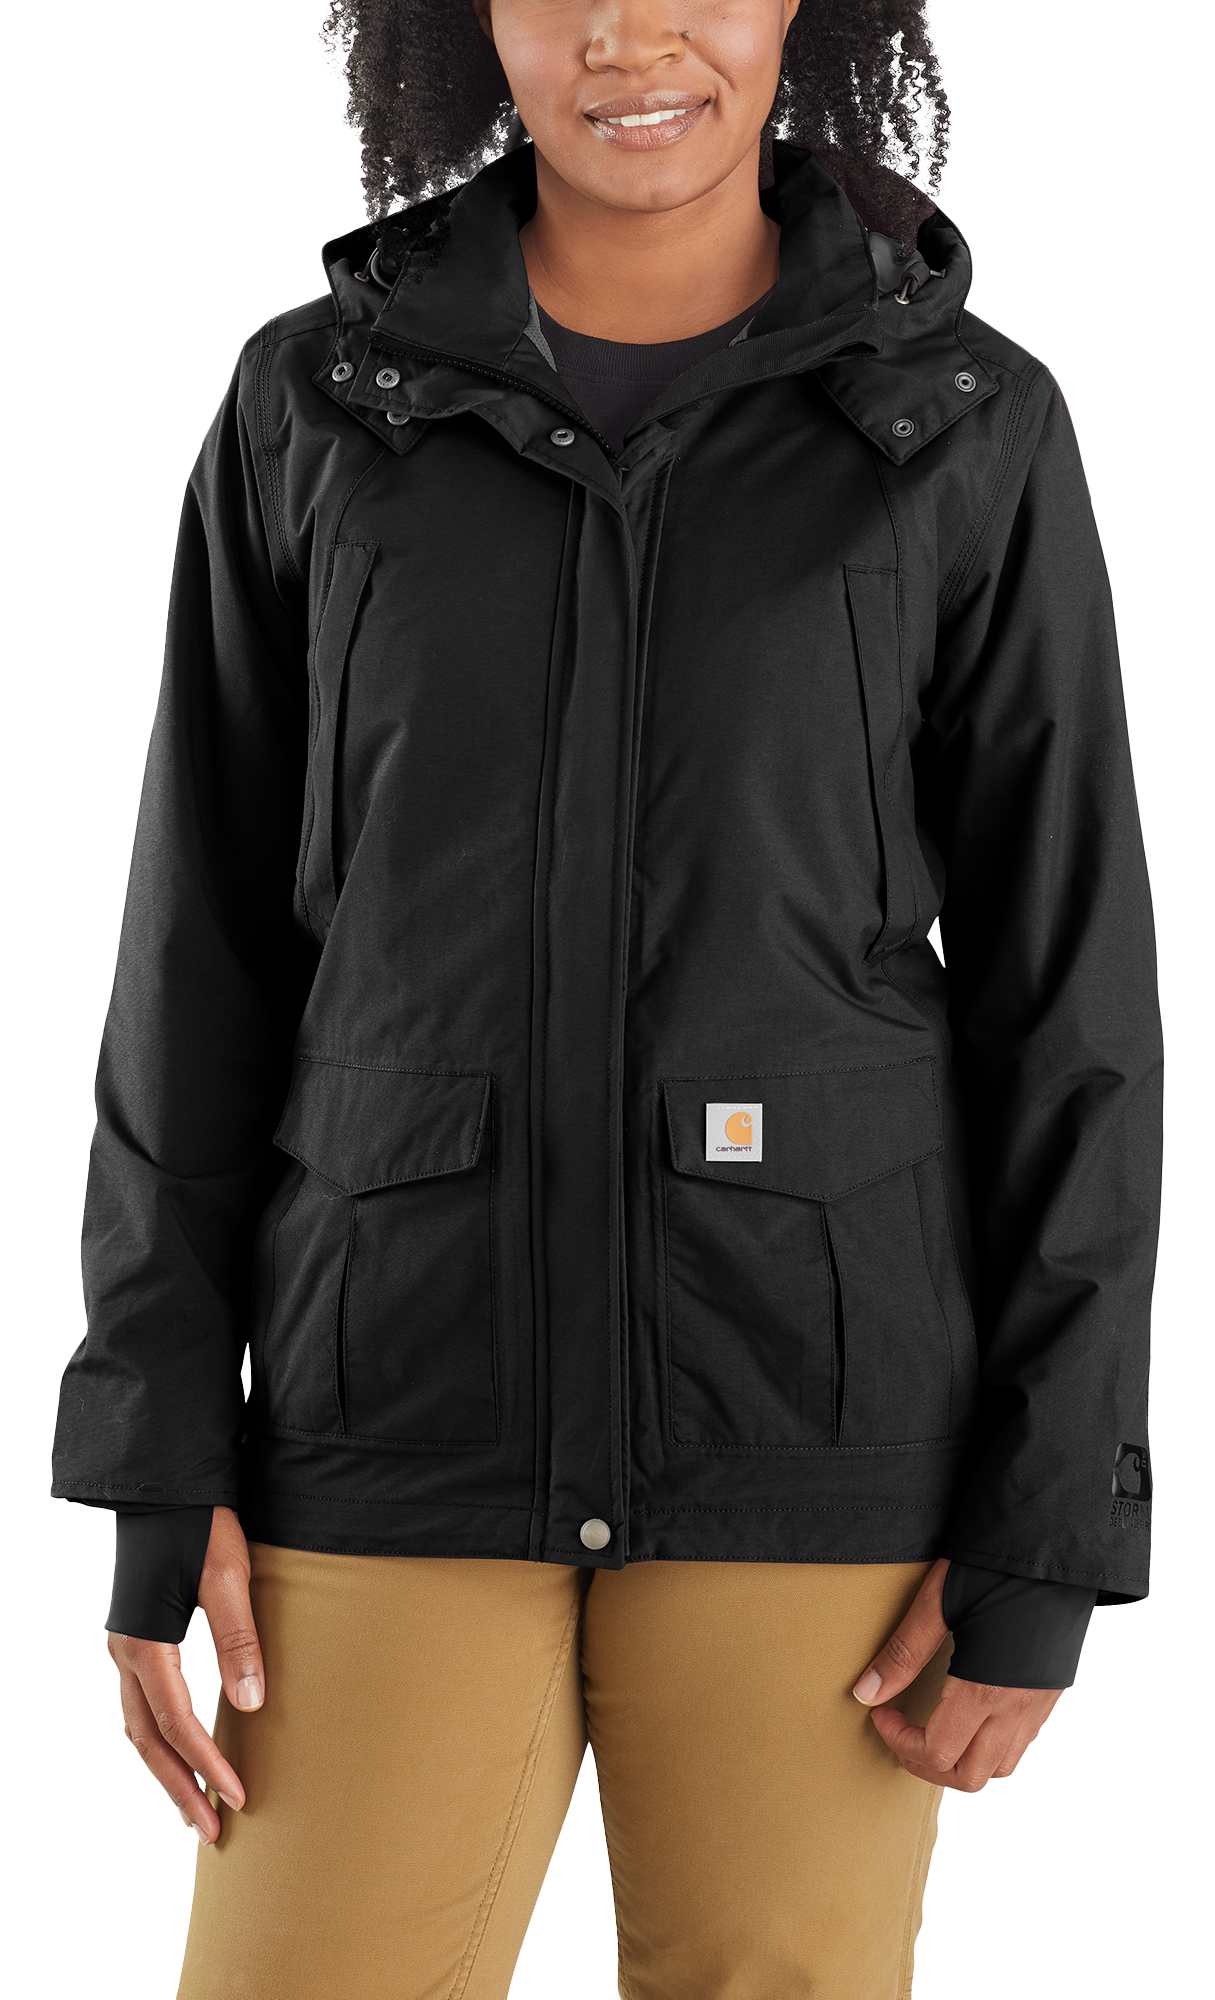 Carhartt Storm Defender Relaxed Fit Heavyweight Jacket for Ladies